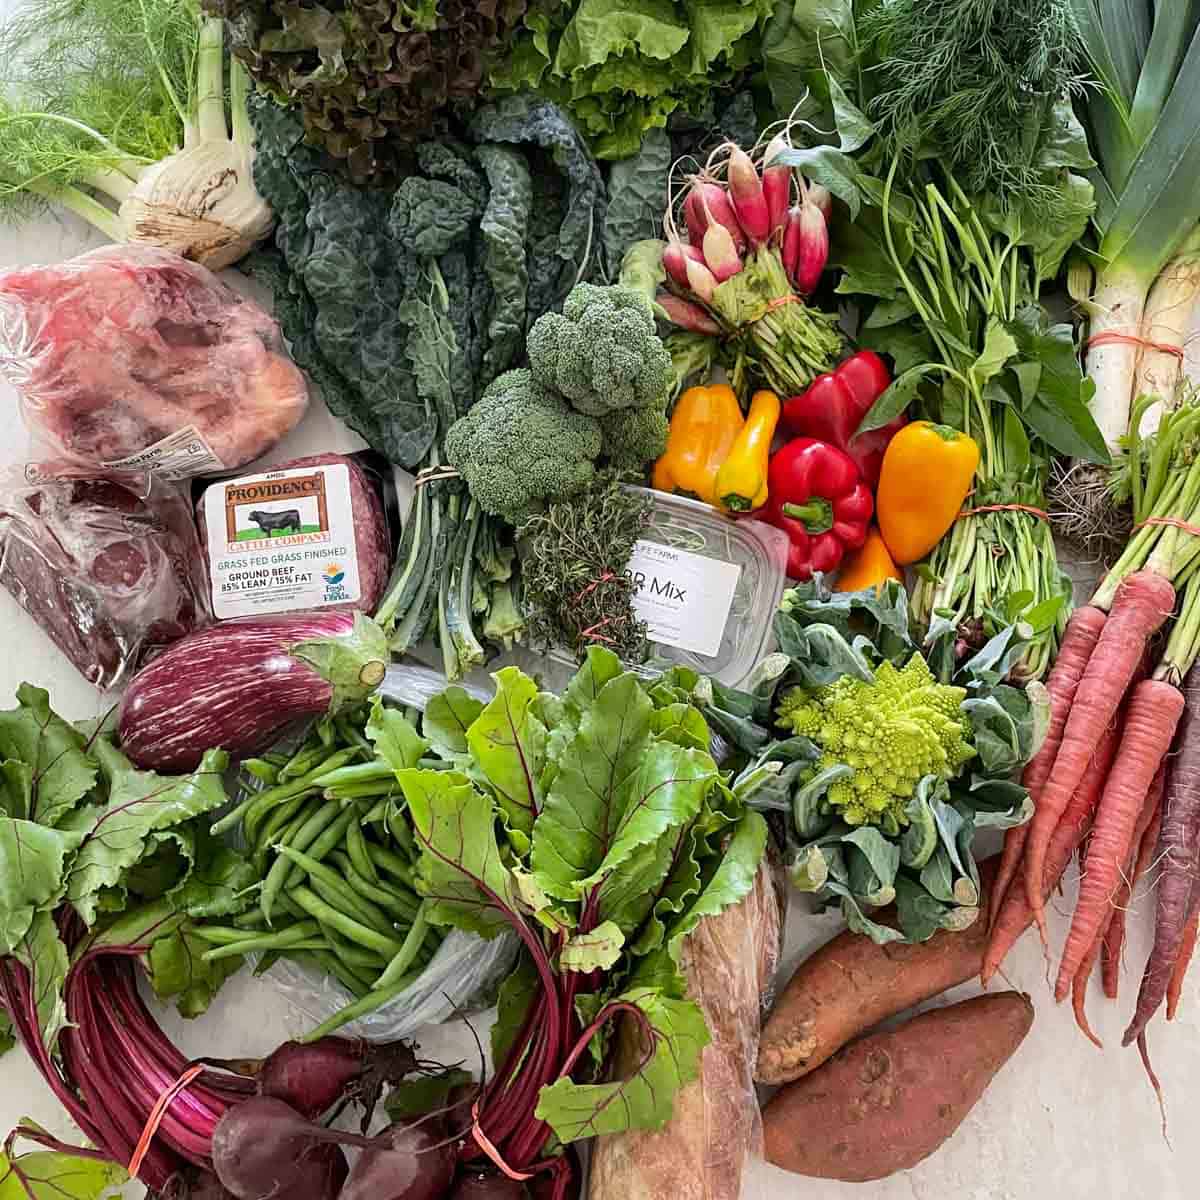 Photo of vegetables and meat bought at a farmer's market